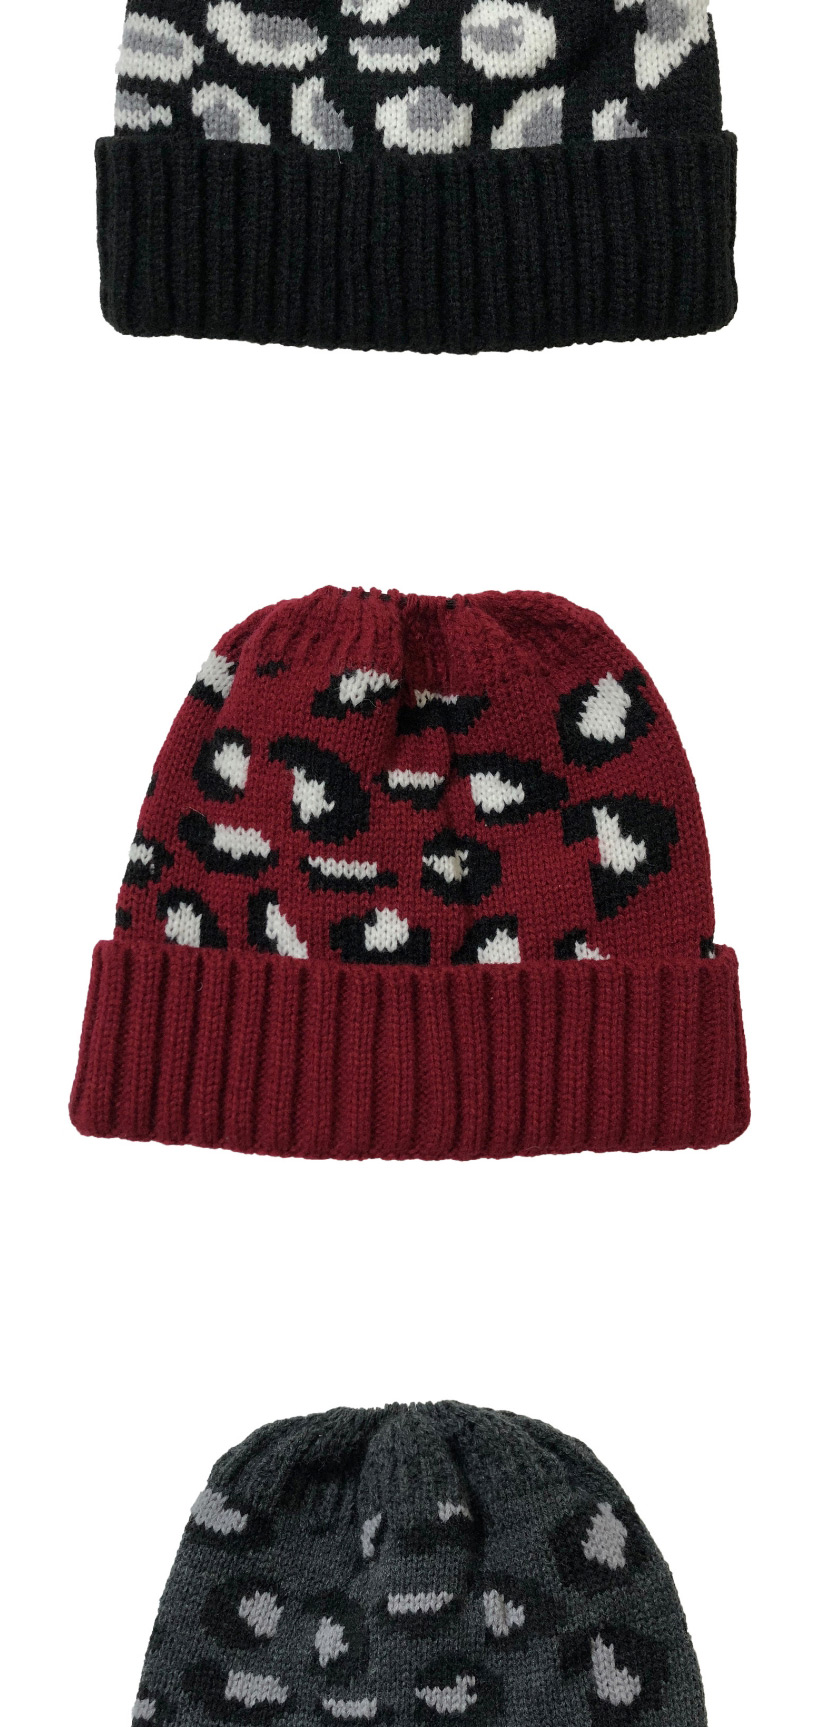 Fashion Claret Leopard Jacquard Ponytail Knitted Beanie,Knitting Wool Hats